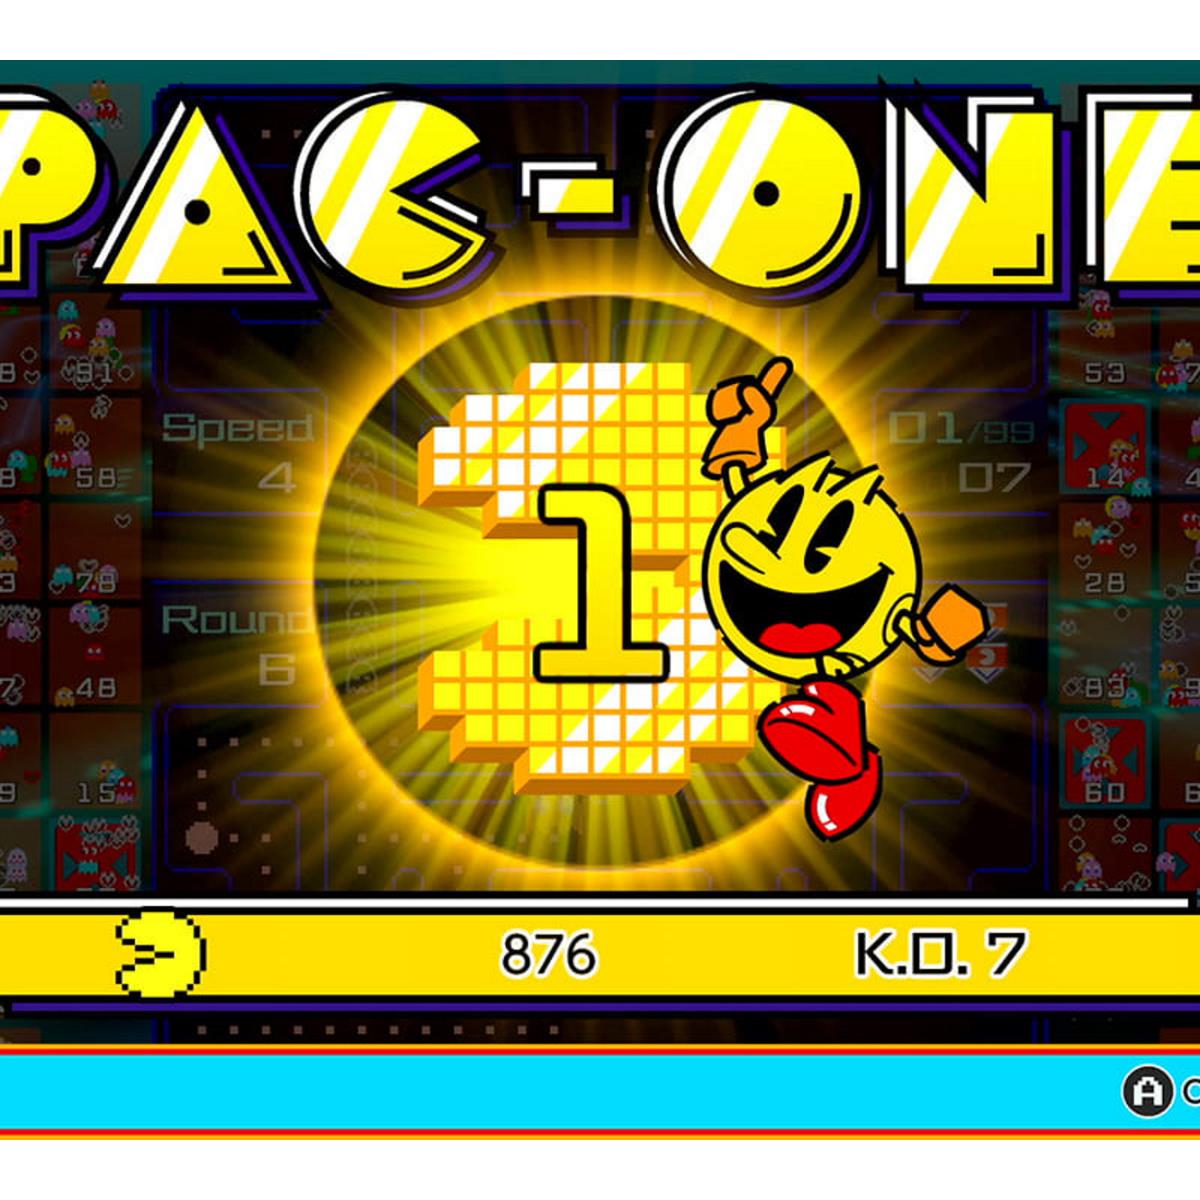 PAC-MAN 99 Announced Exclusively For Nintendo Switch Online